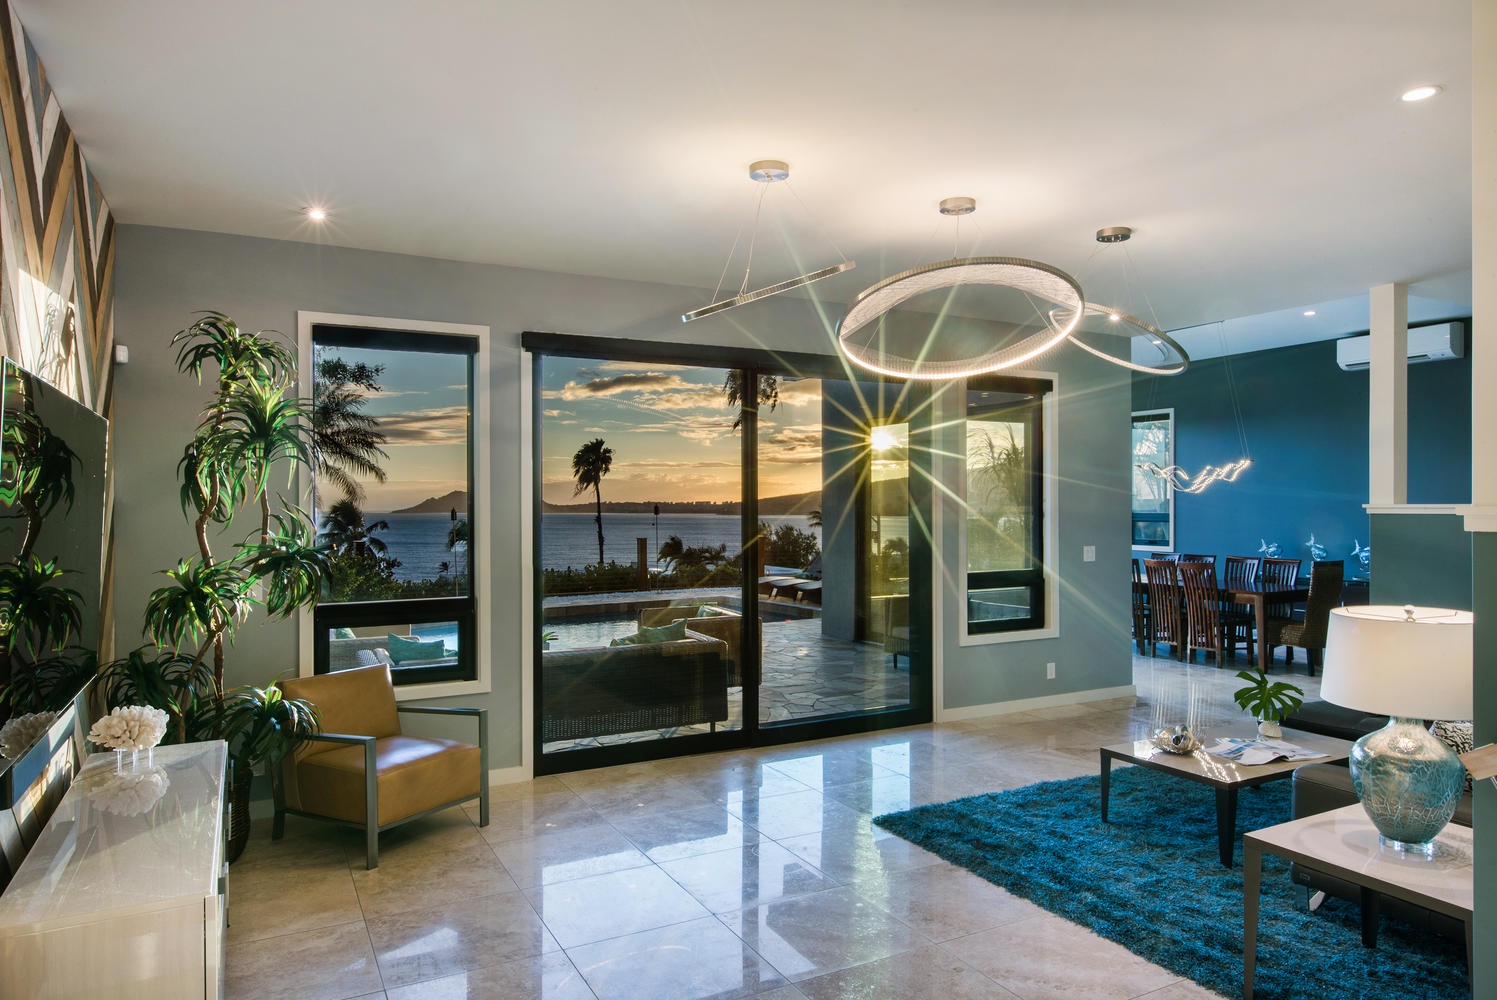 Honolulu Vacation Rentals, Aloha Nalu - More breathtaking views from the front entry!